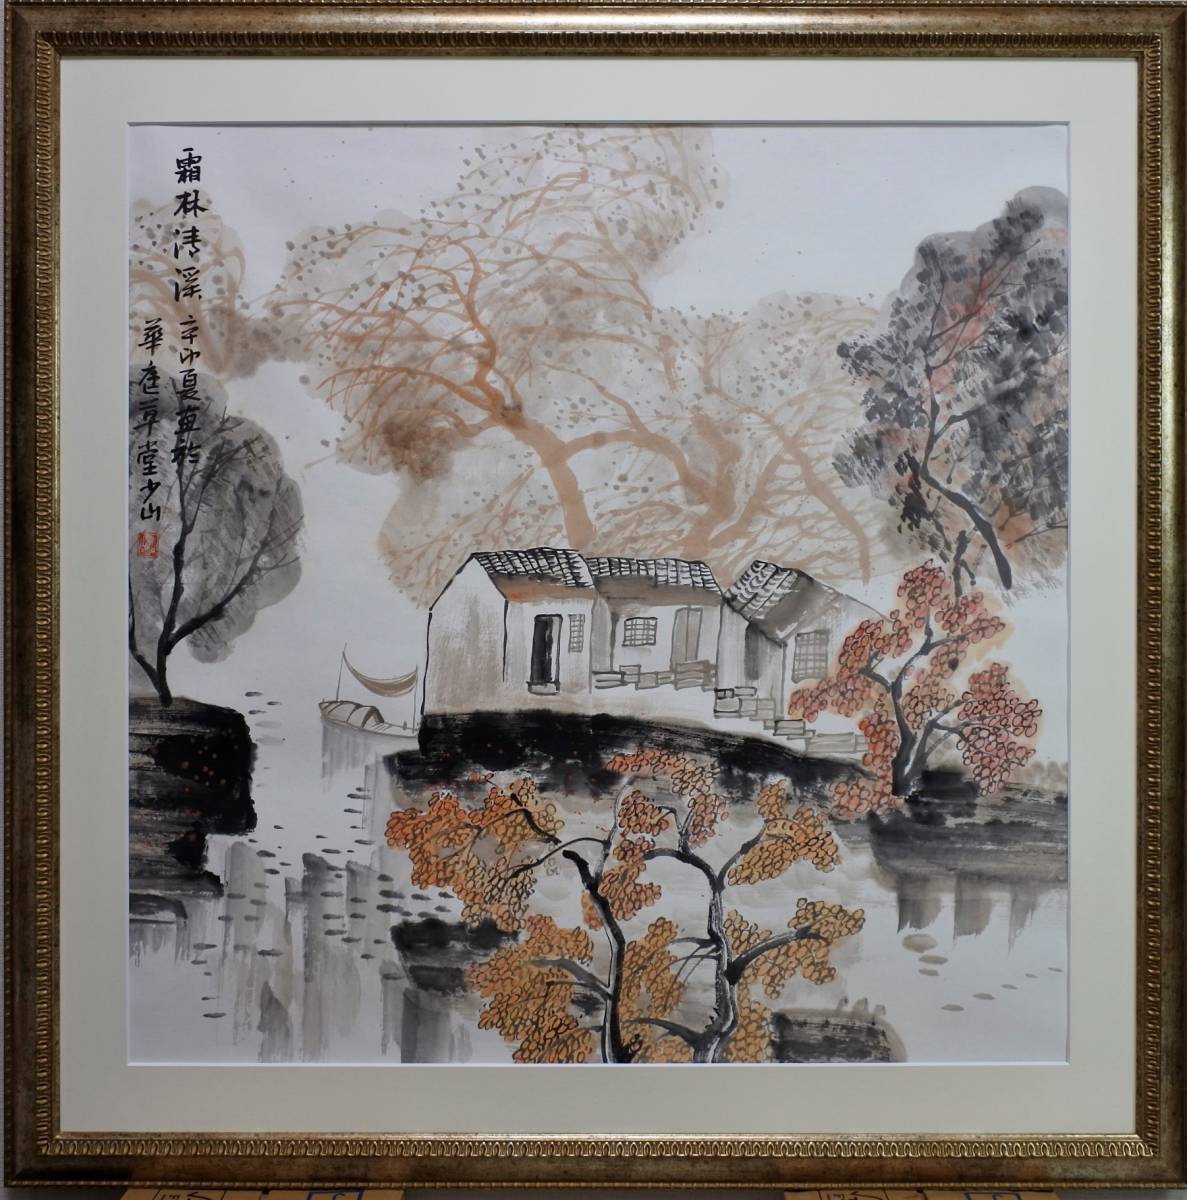 Collection item☆China's first-class painter Gao Shaoshan's work Frost Forest, Clear Stream Painting only. Genuine hand-painted work. Painting only. Stored item. Can be shipped together. Shipping fee is 1600 yen., Artwork, Painting, Ink painting